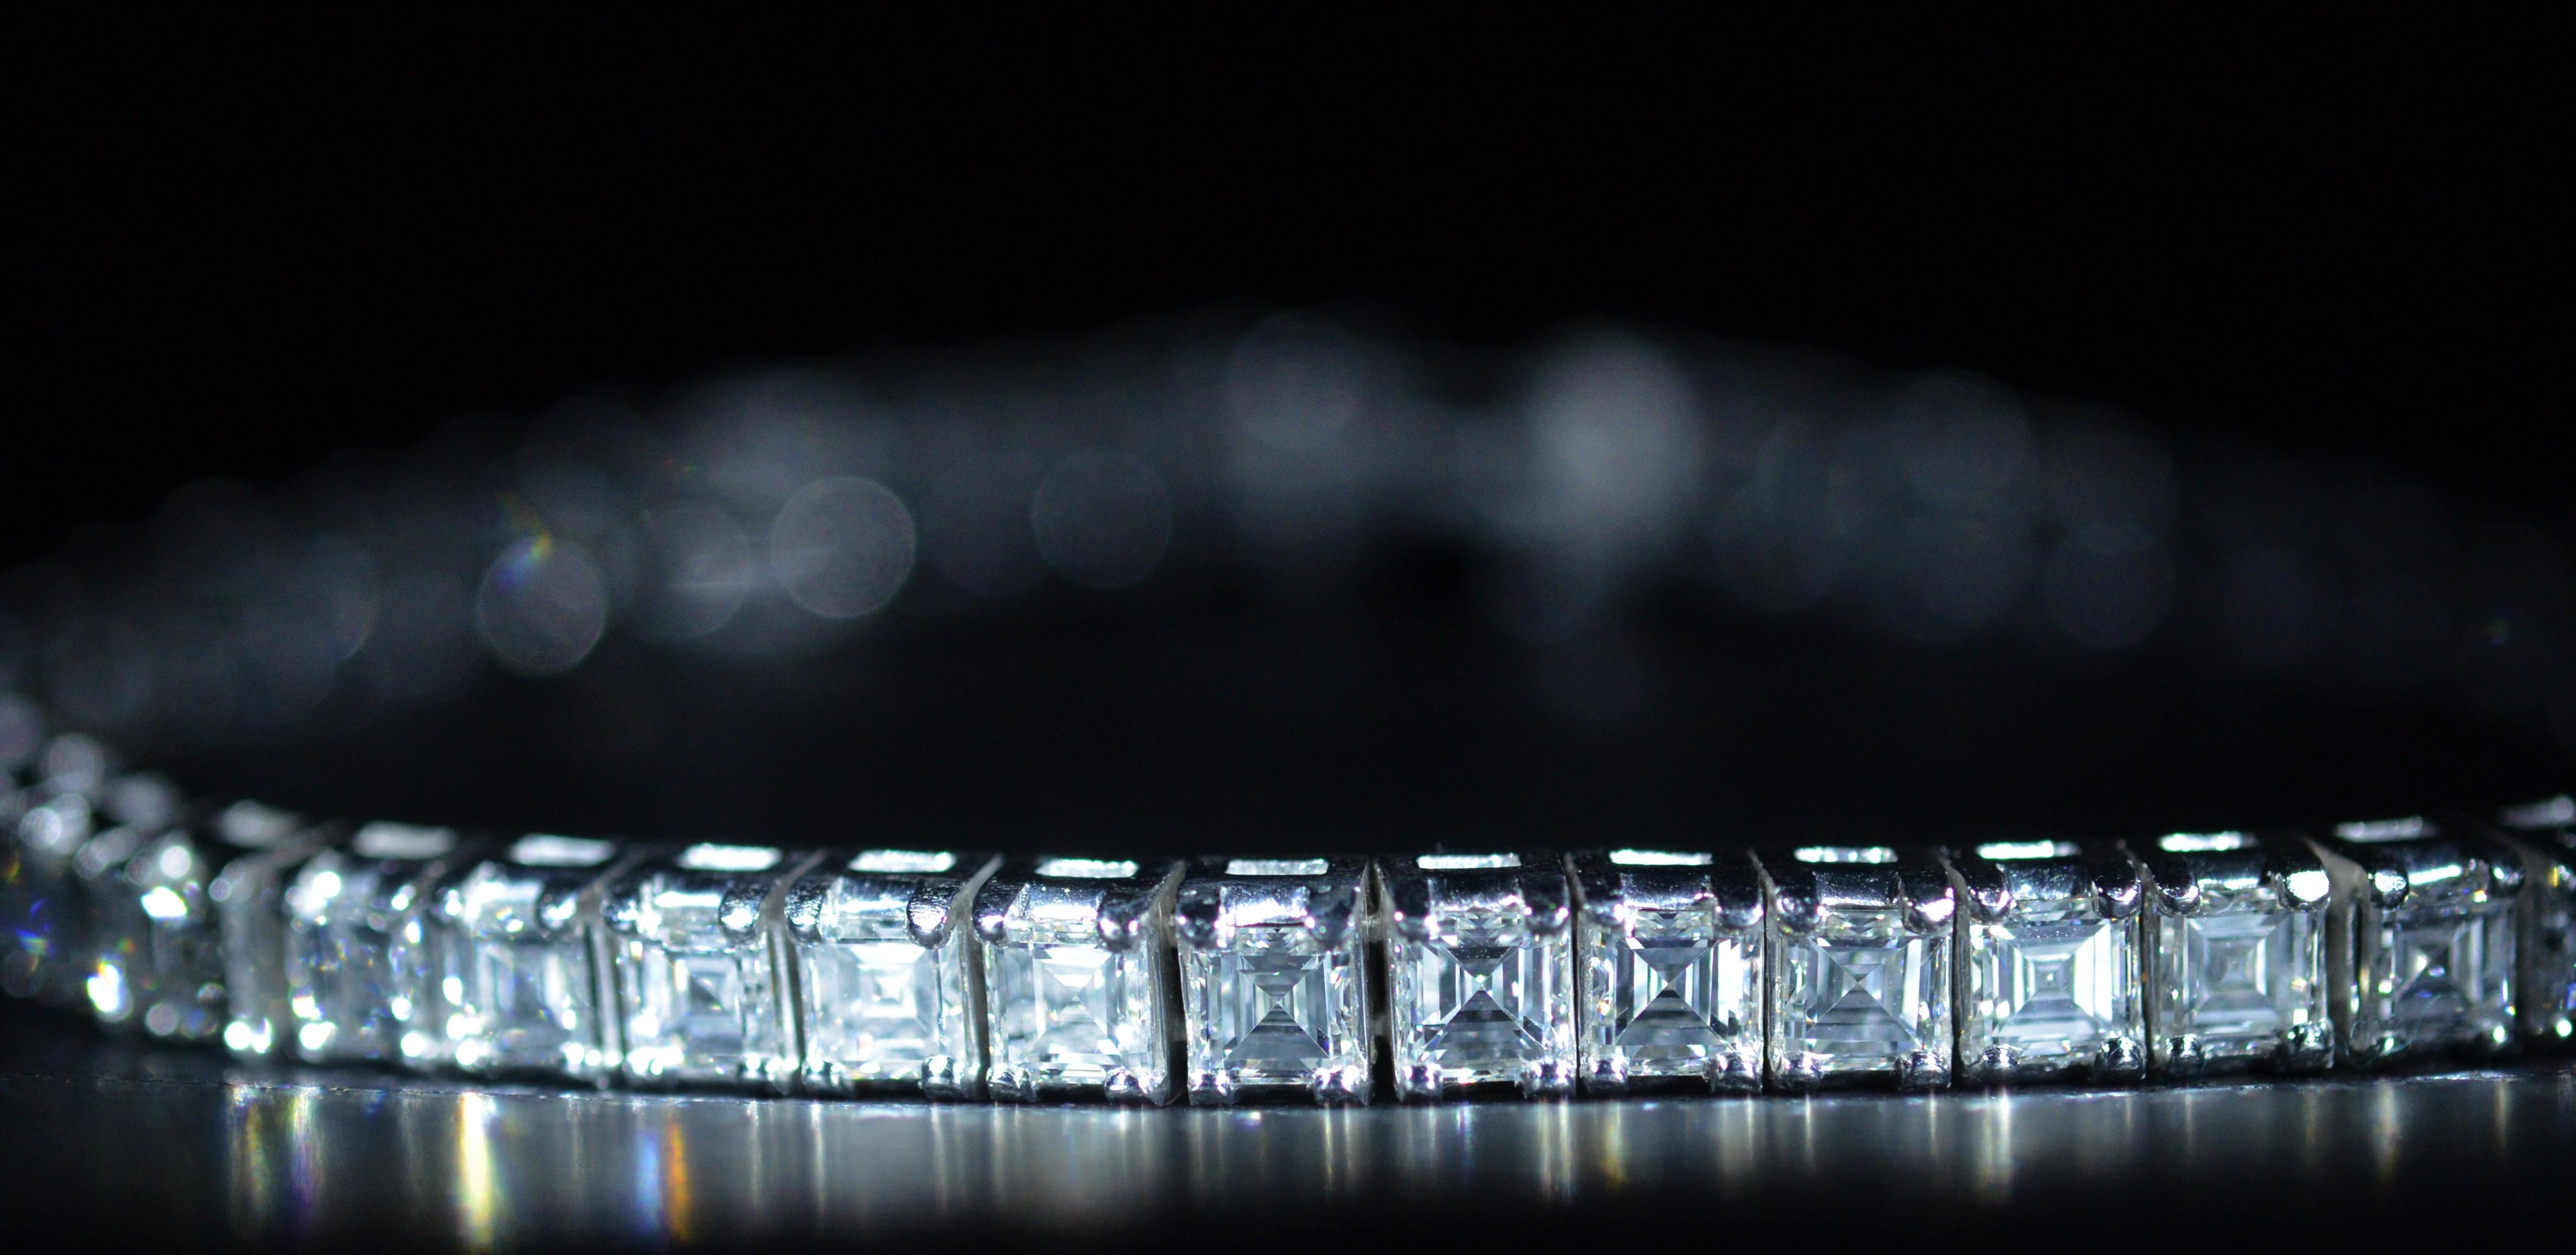 Impressive diamond line bracelet set with 15.84 carats of Asscher cut (square emerald cut or Carre Cut) diamonds. The diamonds have an approximate Gemological Institute of America clarity grade ranging from vvs1 to vs1 and a color grade of G. The